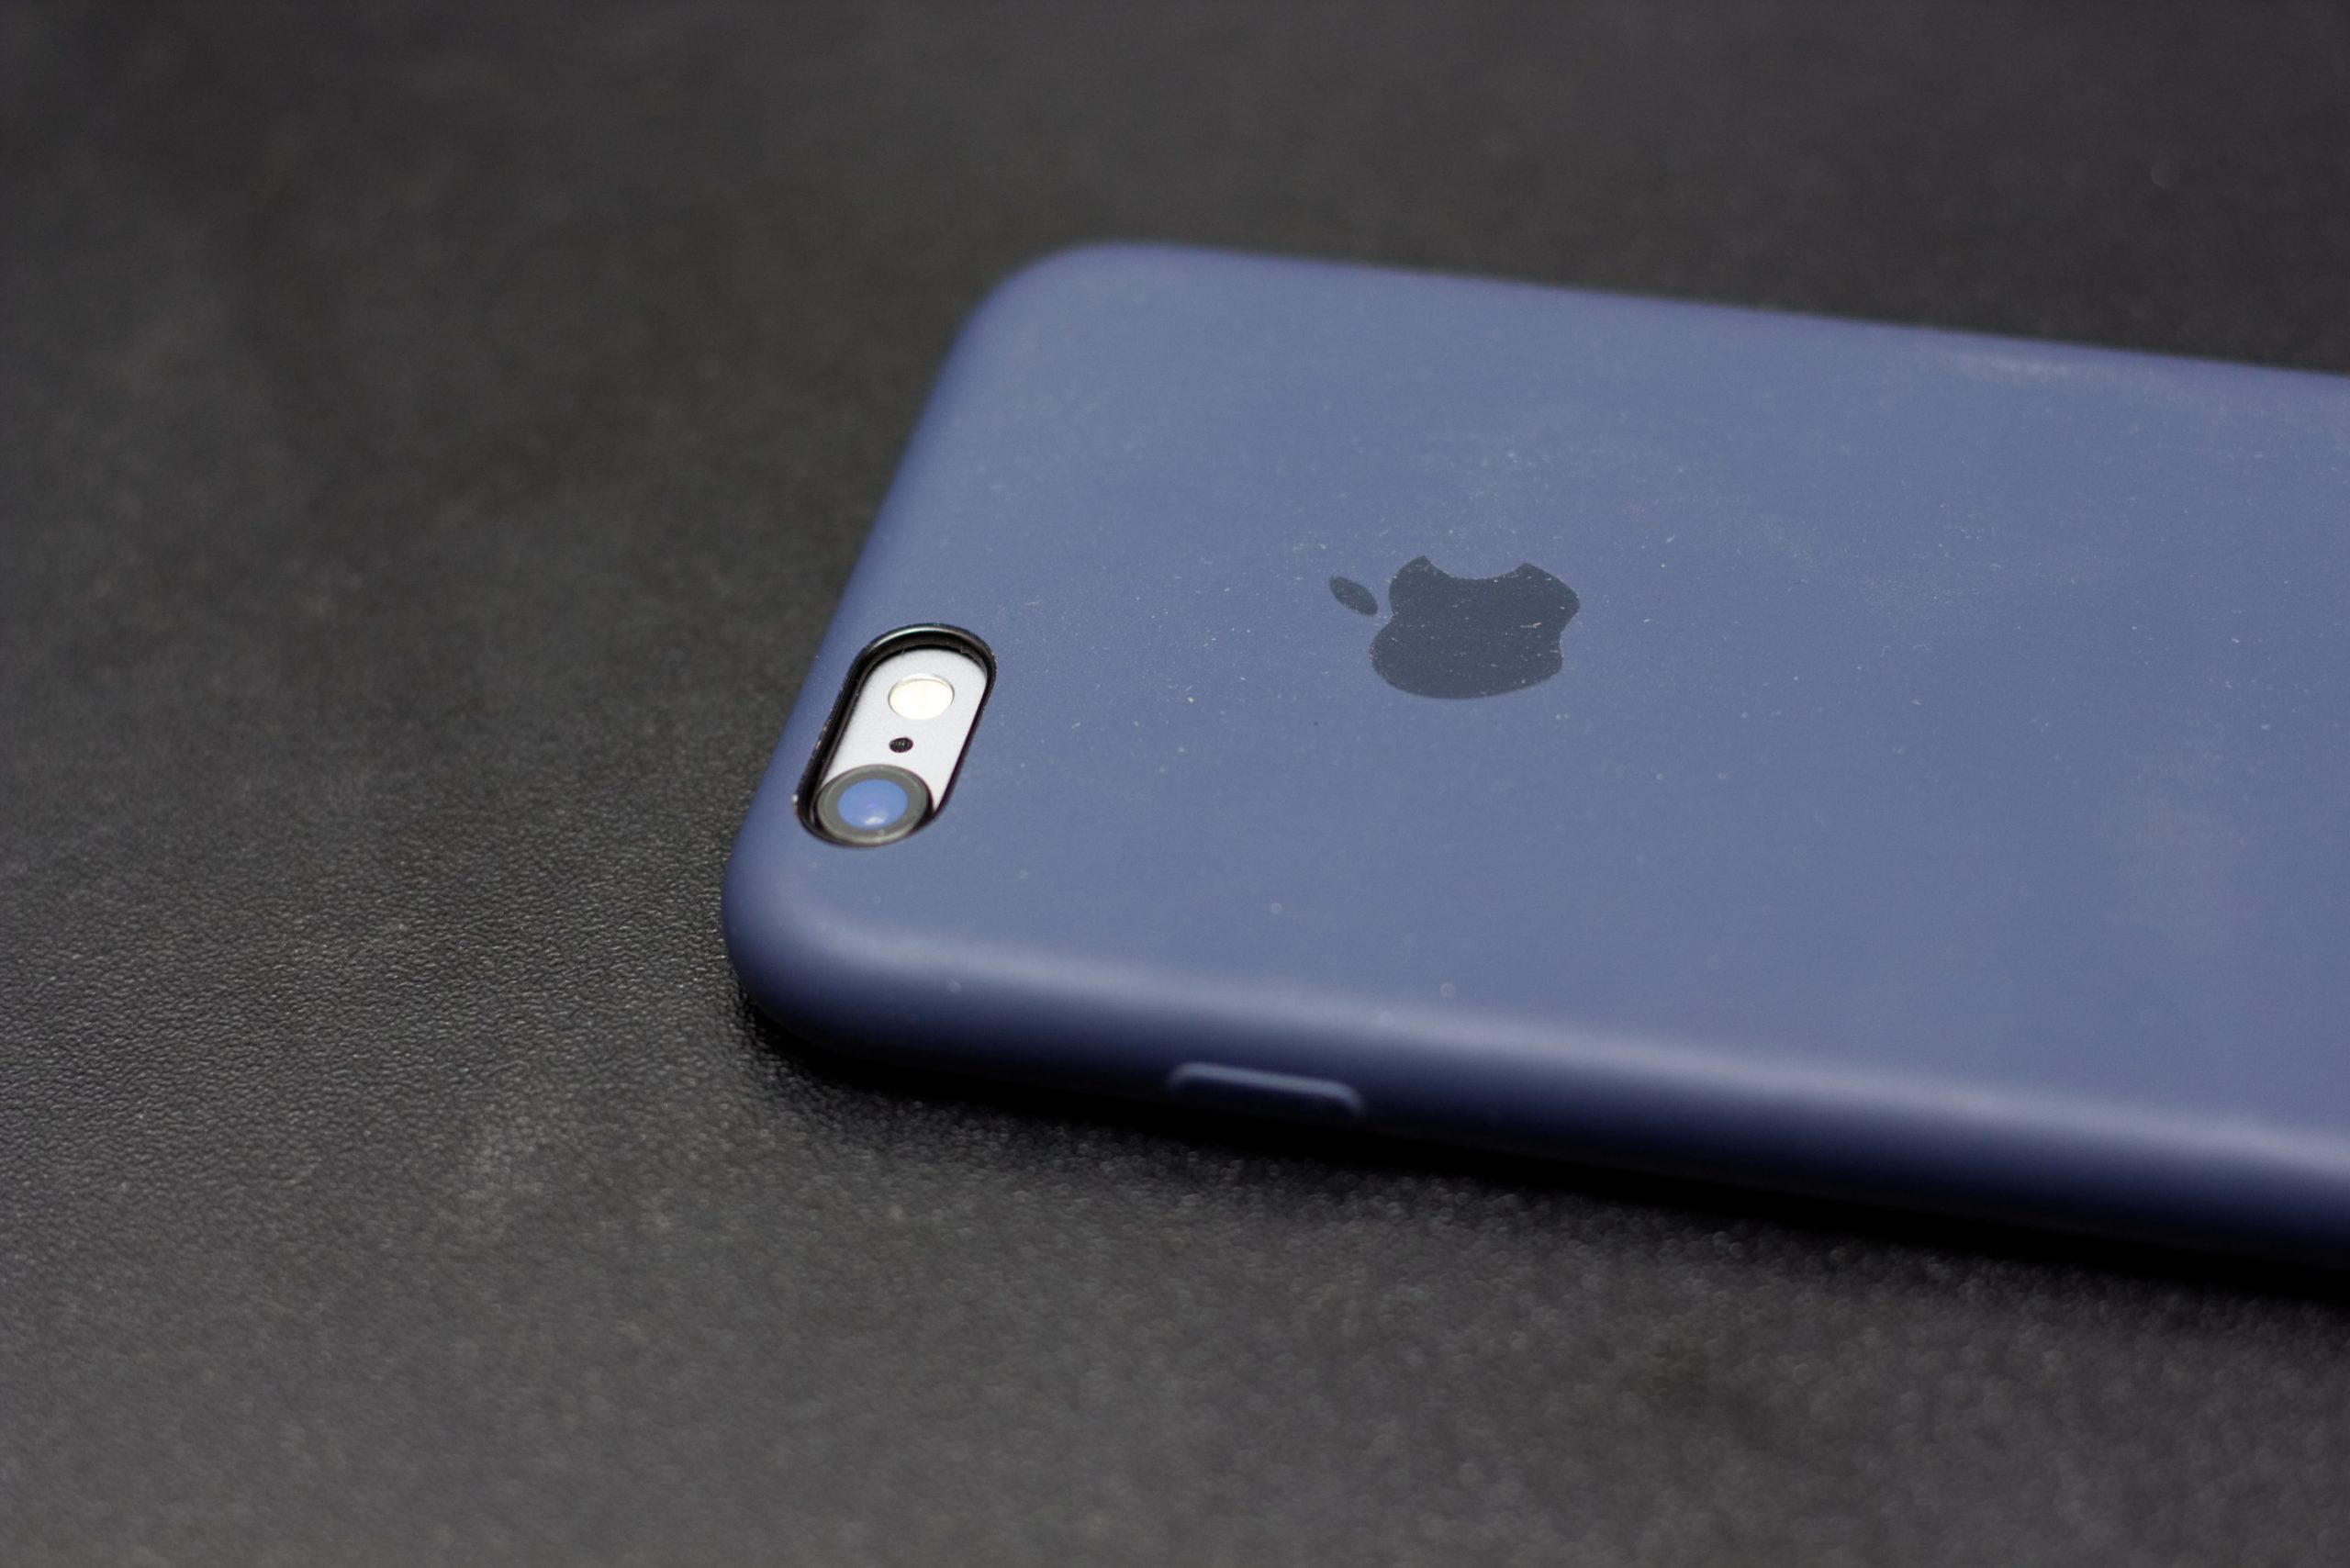 Should you use a case on your iPhone? Mactrovert